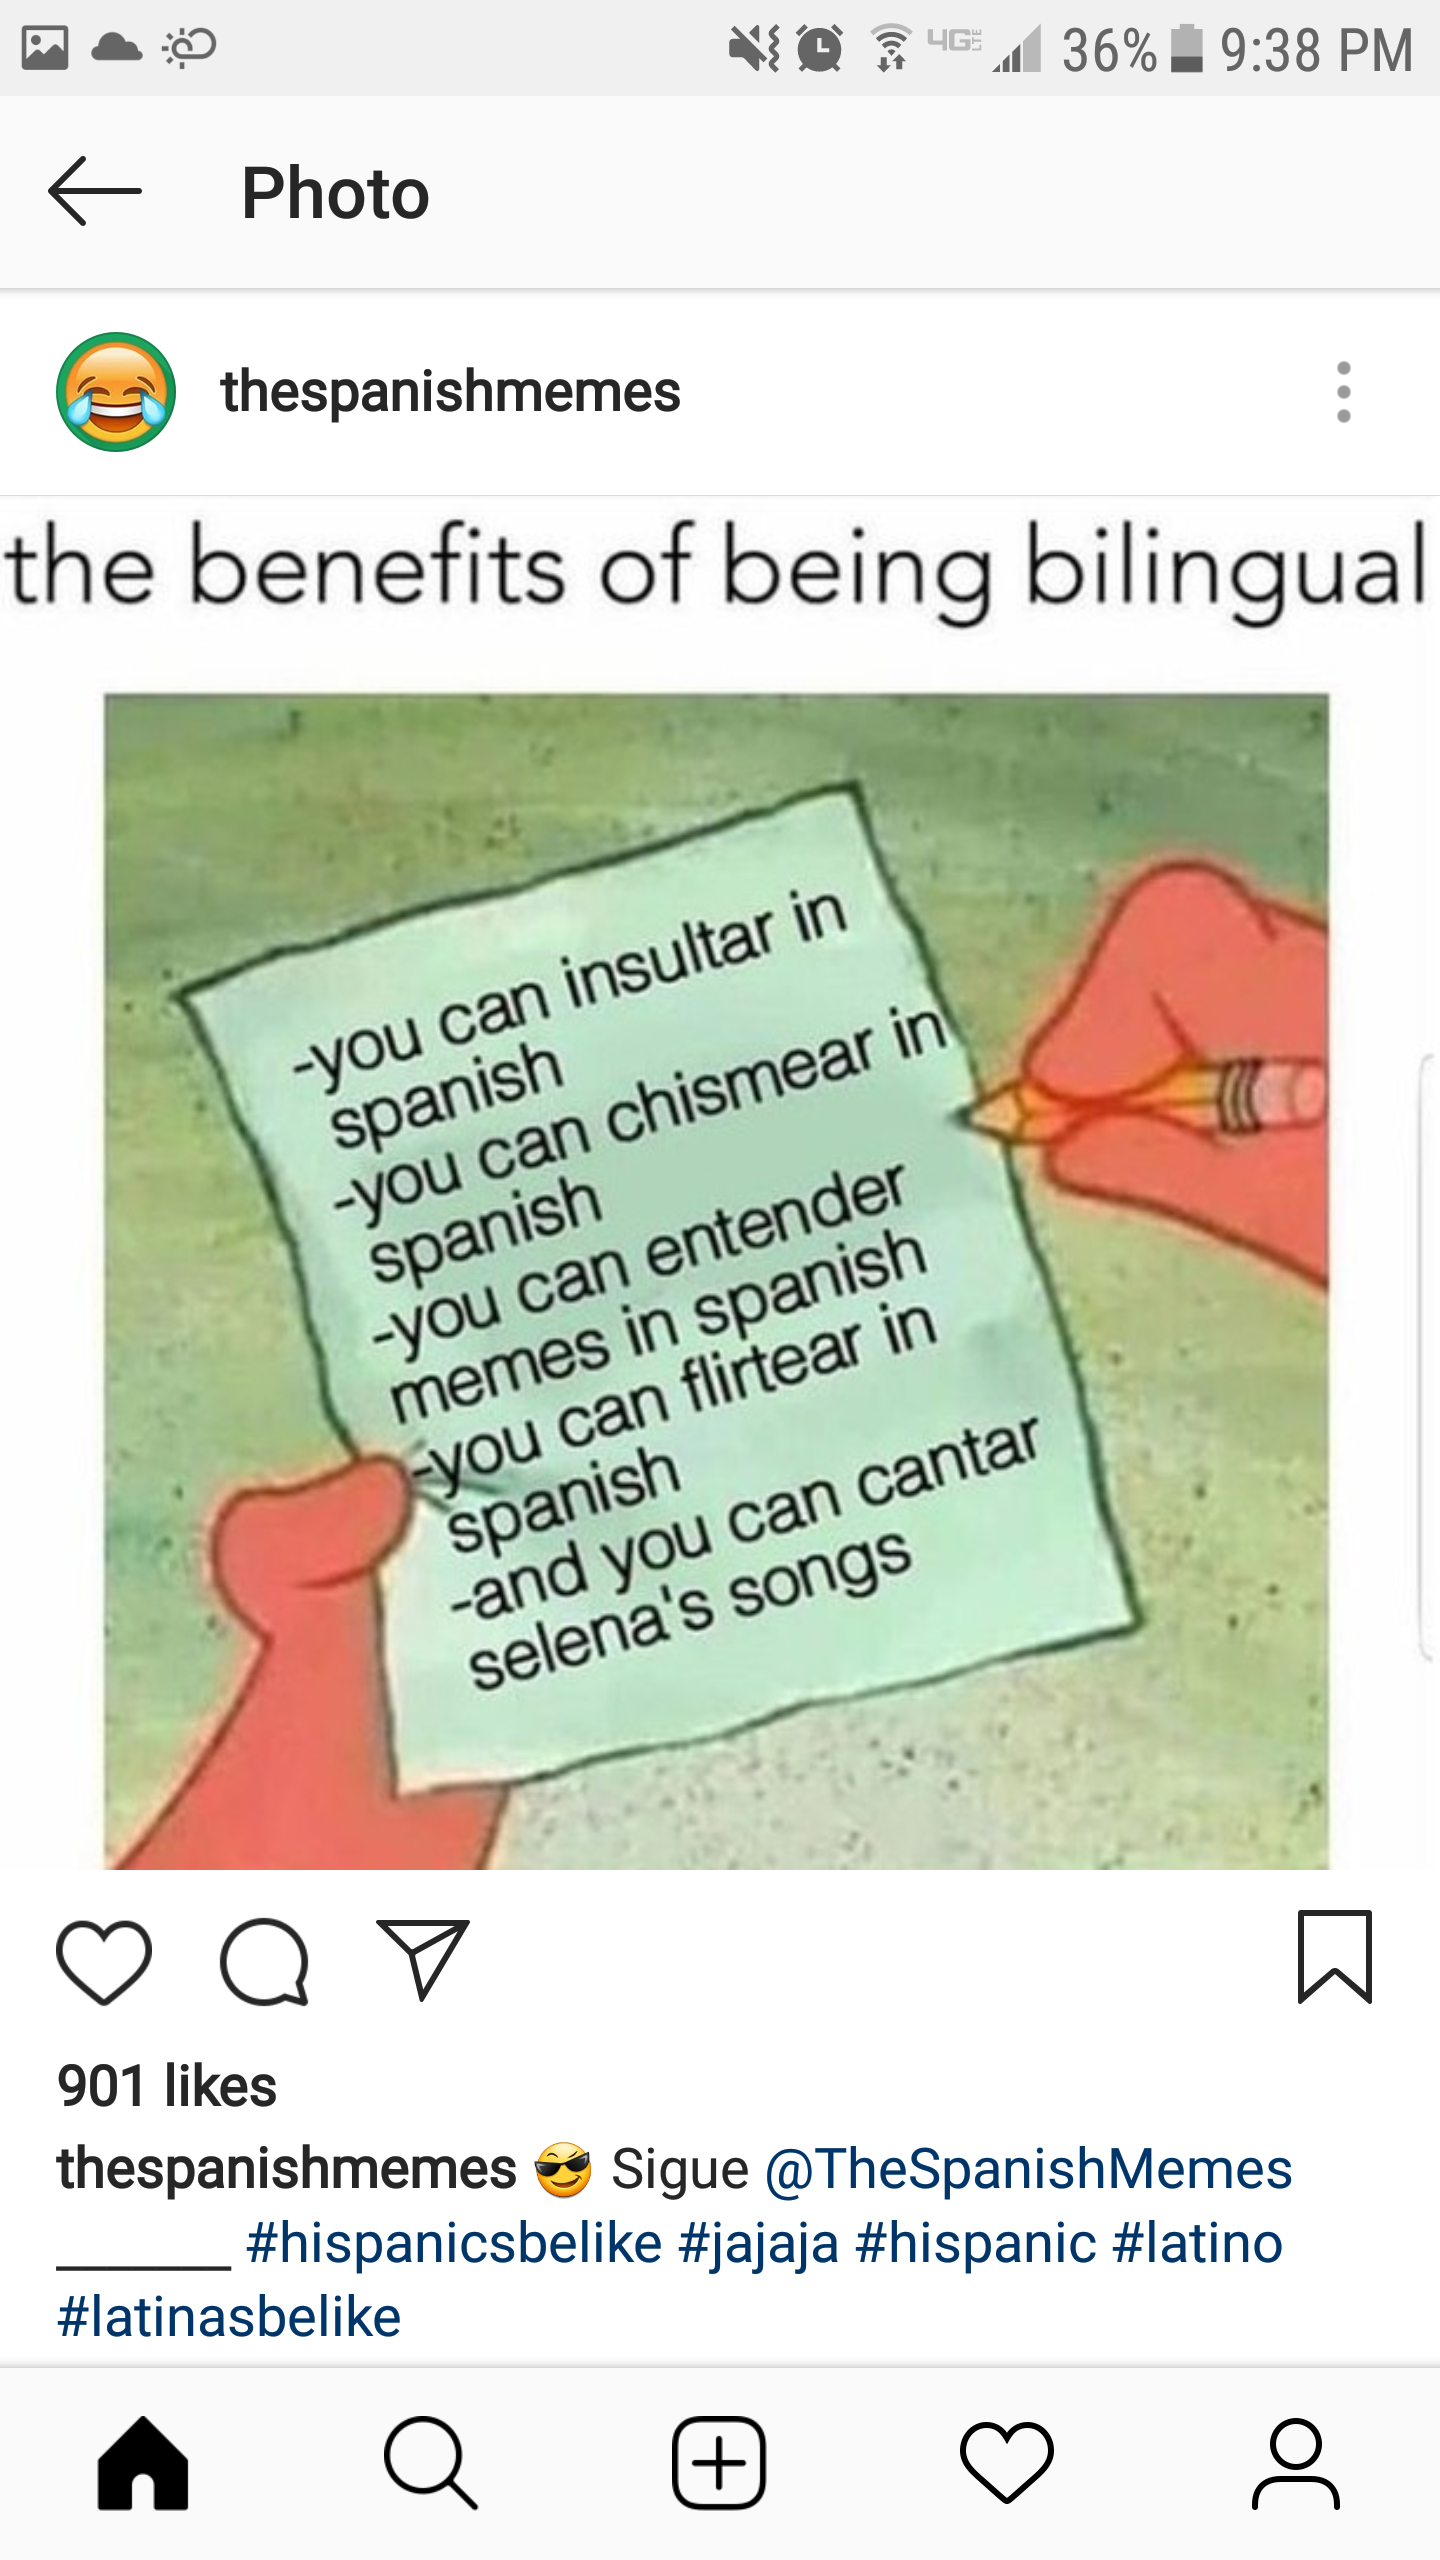 angle - No .36% Photo thespanishmemes the benefits of being bilingual you can insultar in spanish you can chismear in spanish you can entender memes in spanish you can flirtear in Spanish and you can cantar selena's songs Q7 901 thespanishmemes Sigue Meme